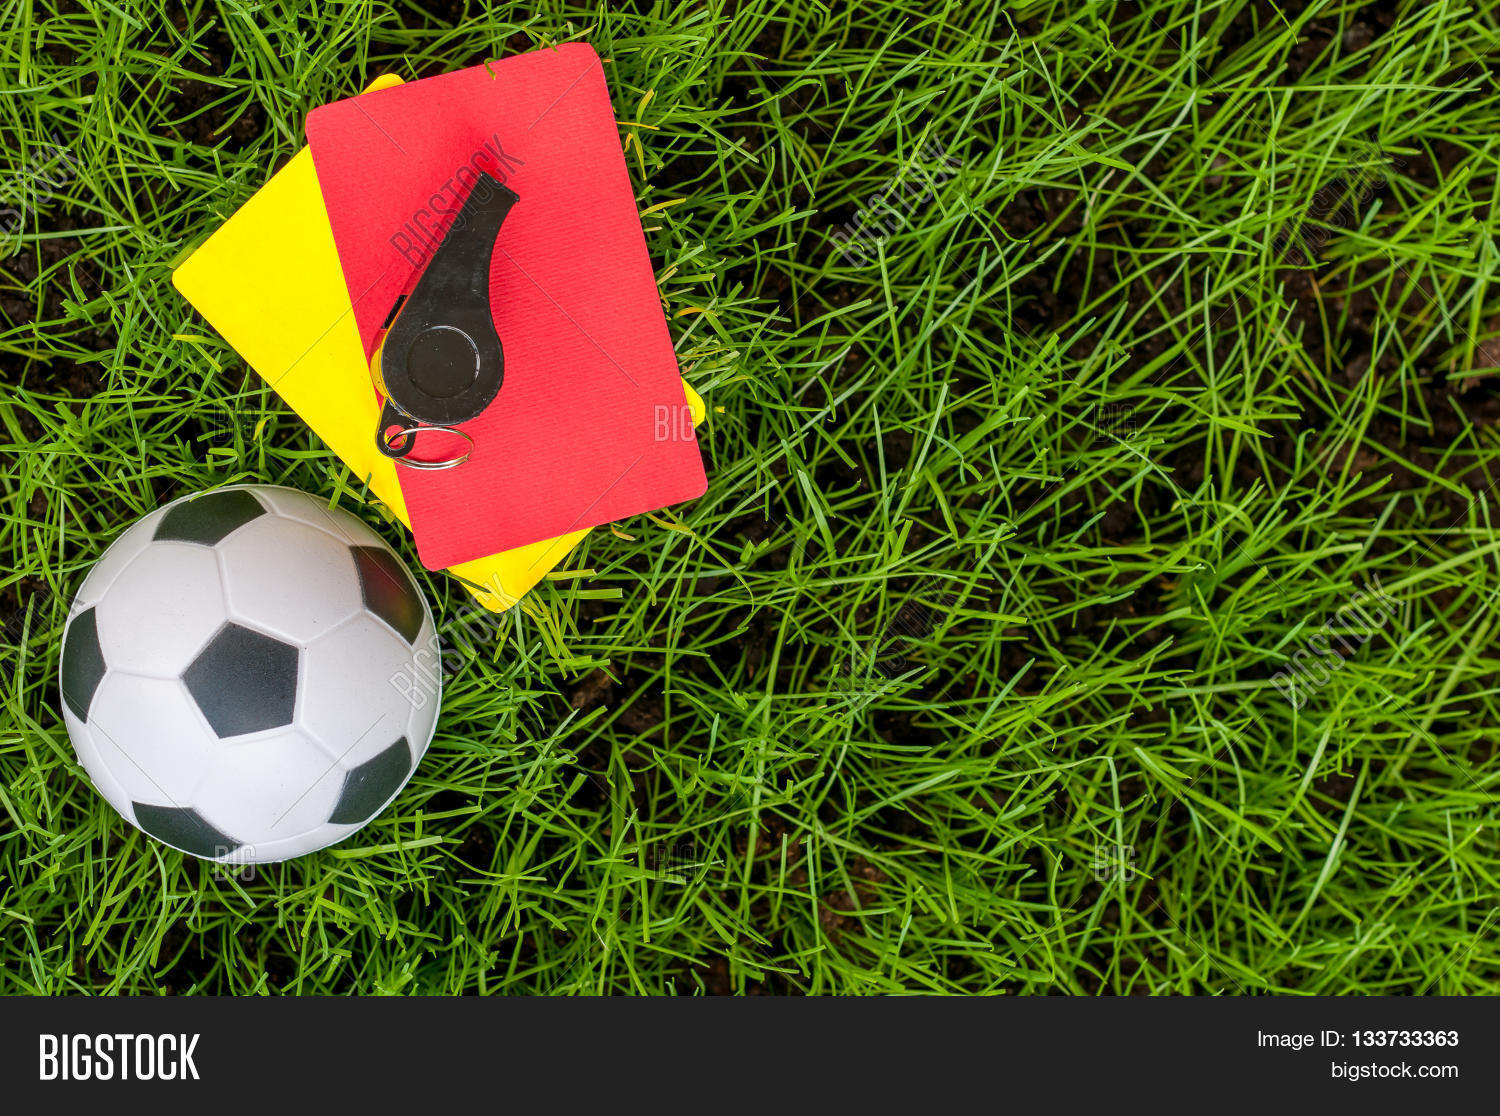 Soccer Referee Outfit Image Photo Trial Bigstock